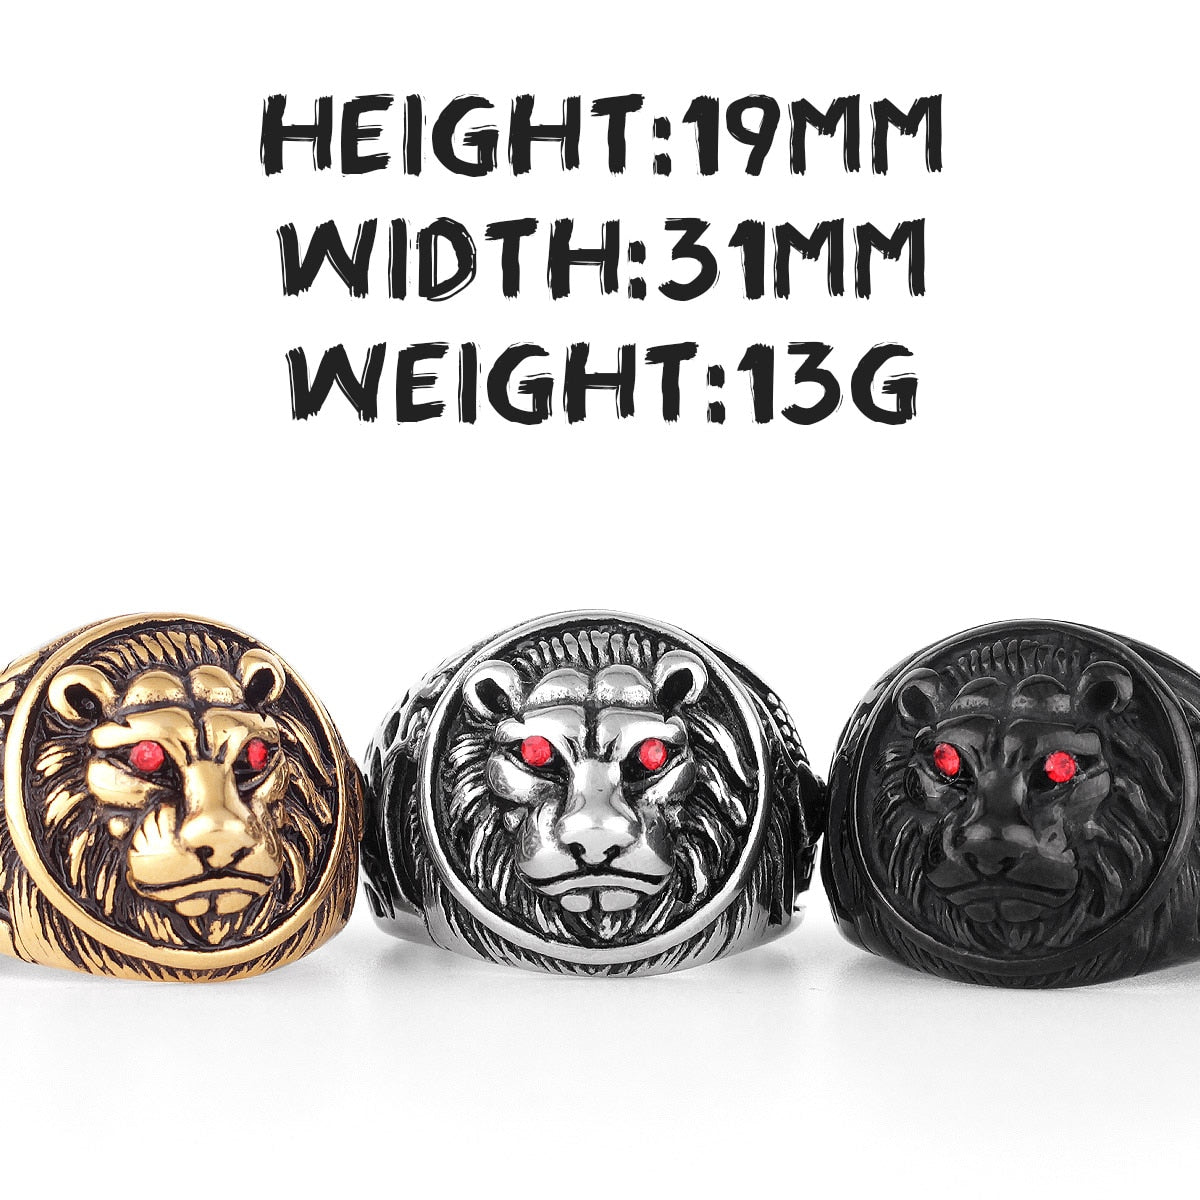 Black Tiger Animal Stainless Steel Mens Rings Punk HipHop Rap Unique For Male Boyfriend Biker Jewelry Creativity Gift